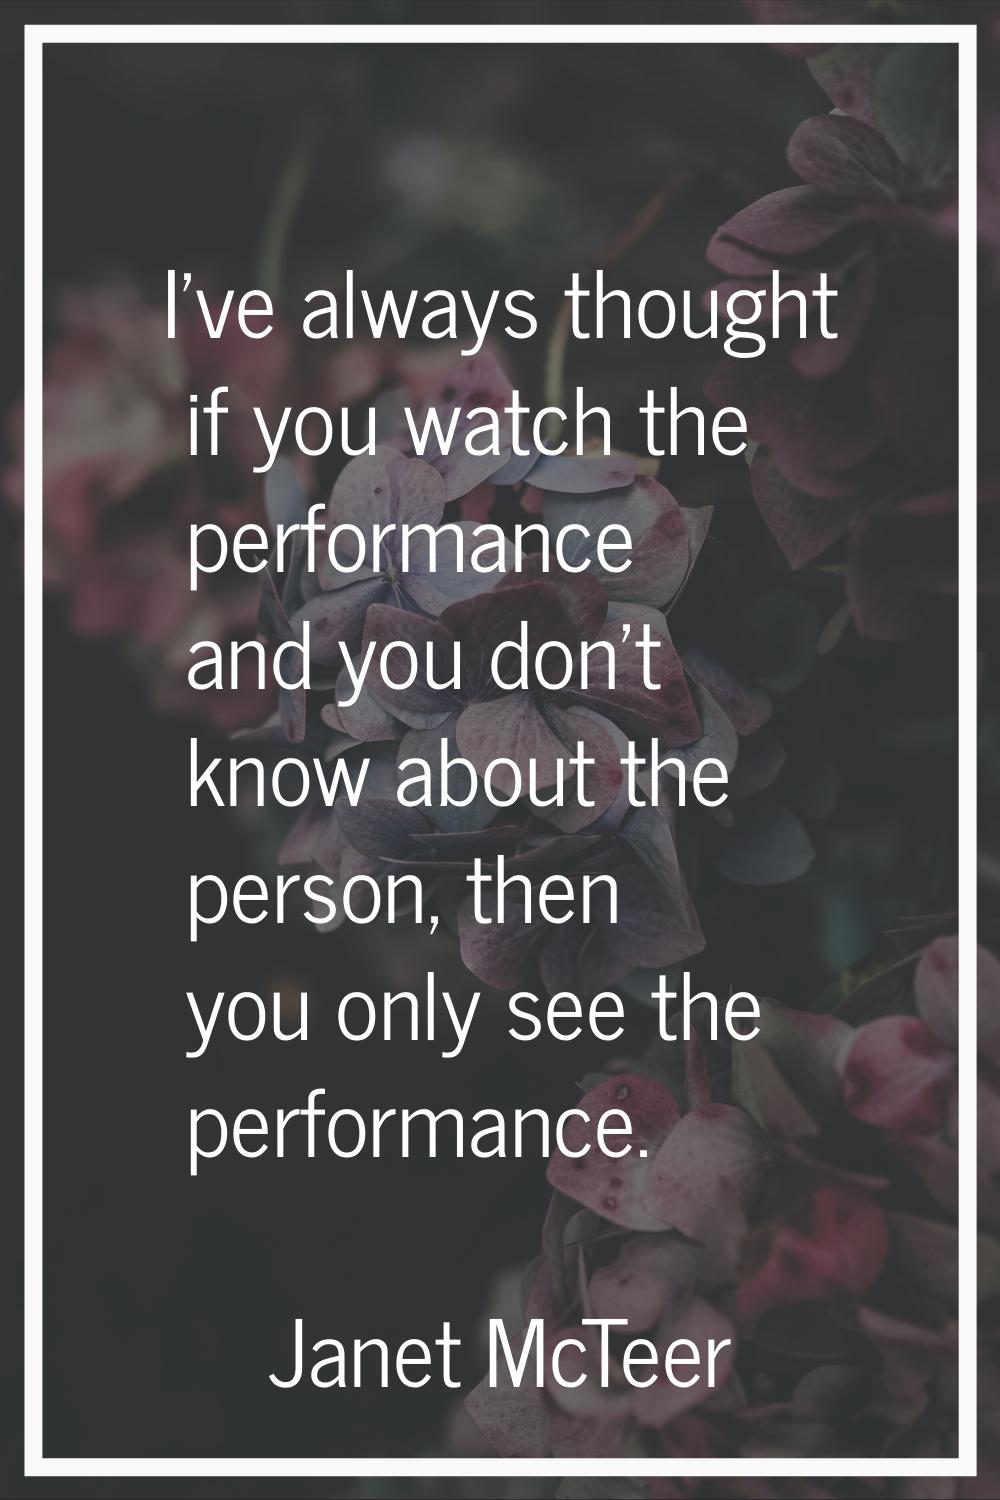 I've always thought if you watch the performance and you don't know about the person, then you only